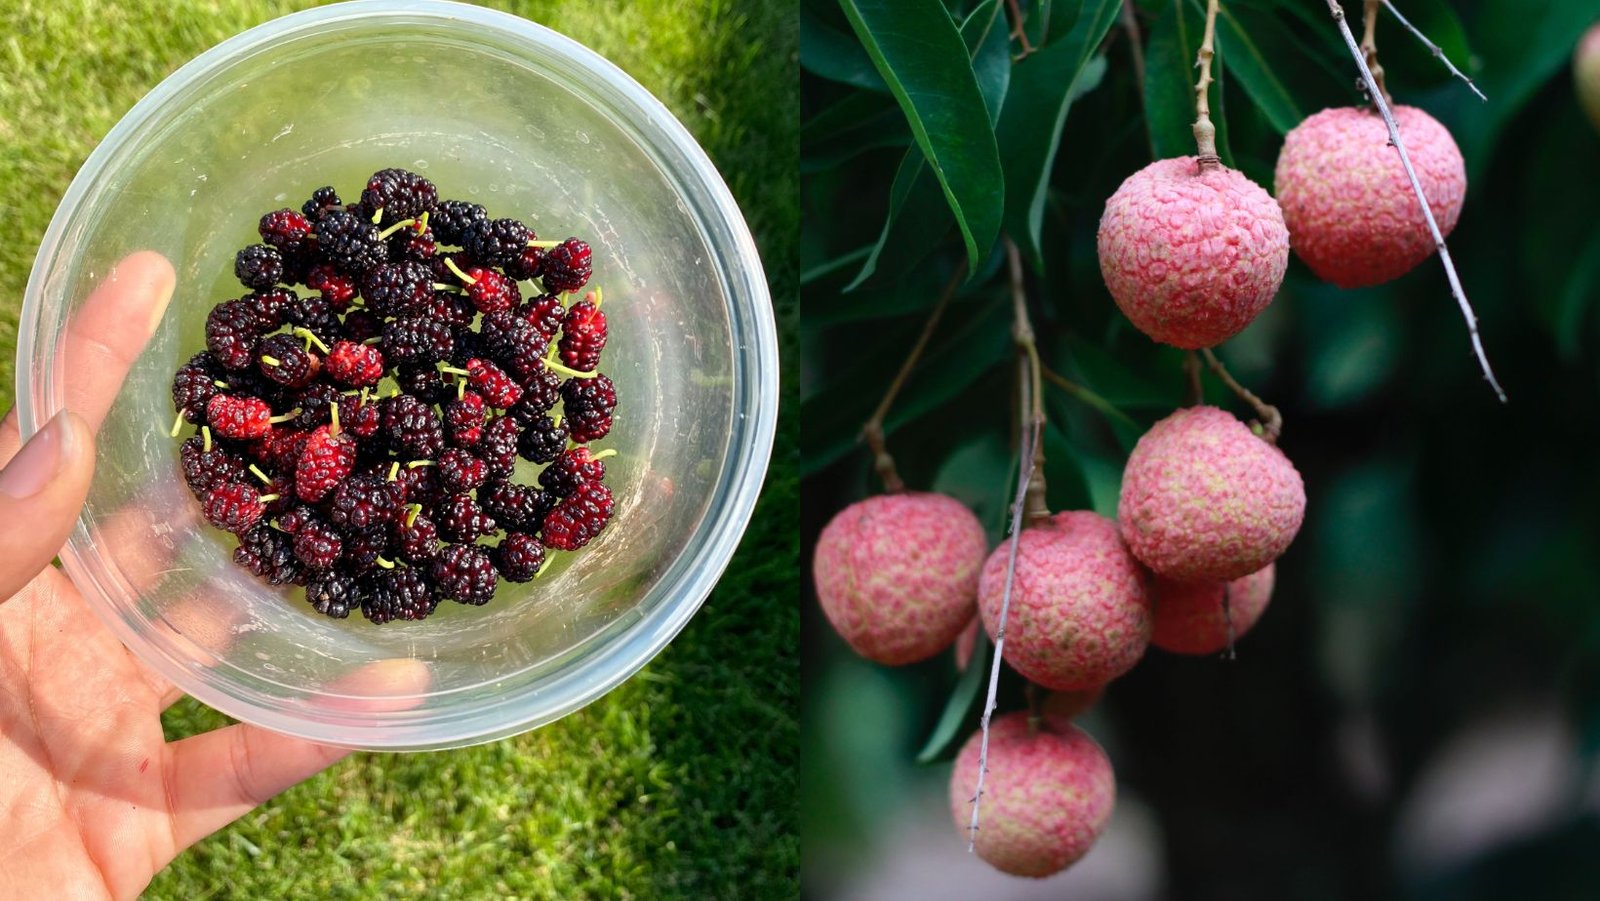 Mulberry and Lychee. Healthy Fruits of Summer